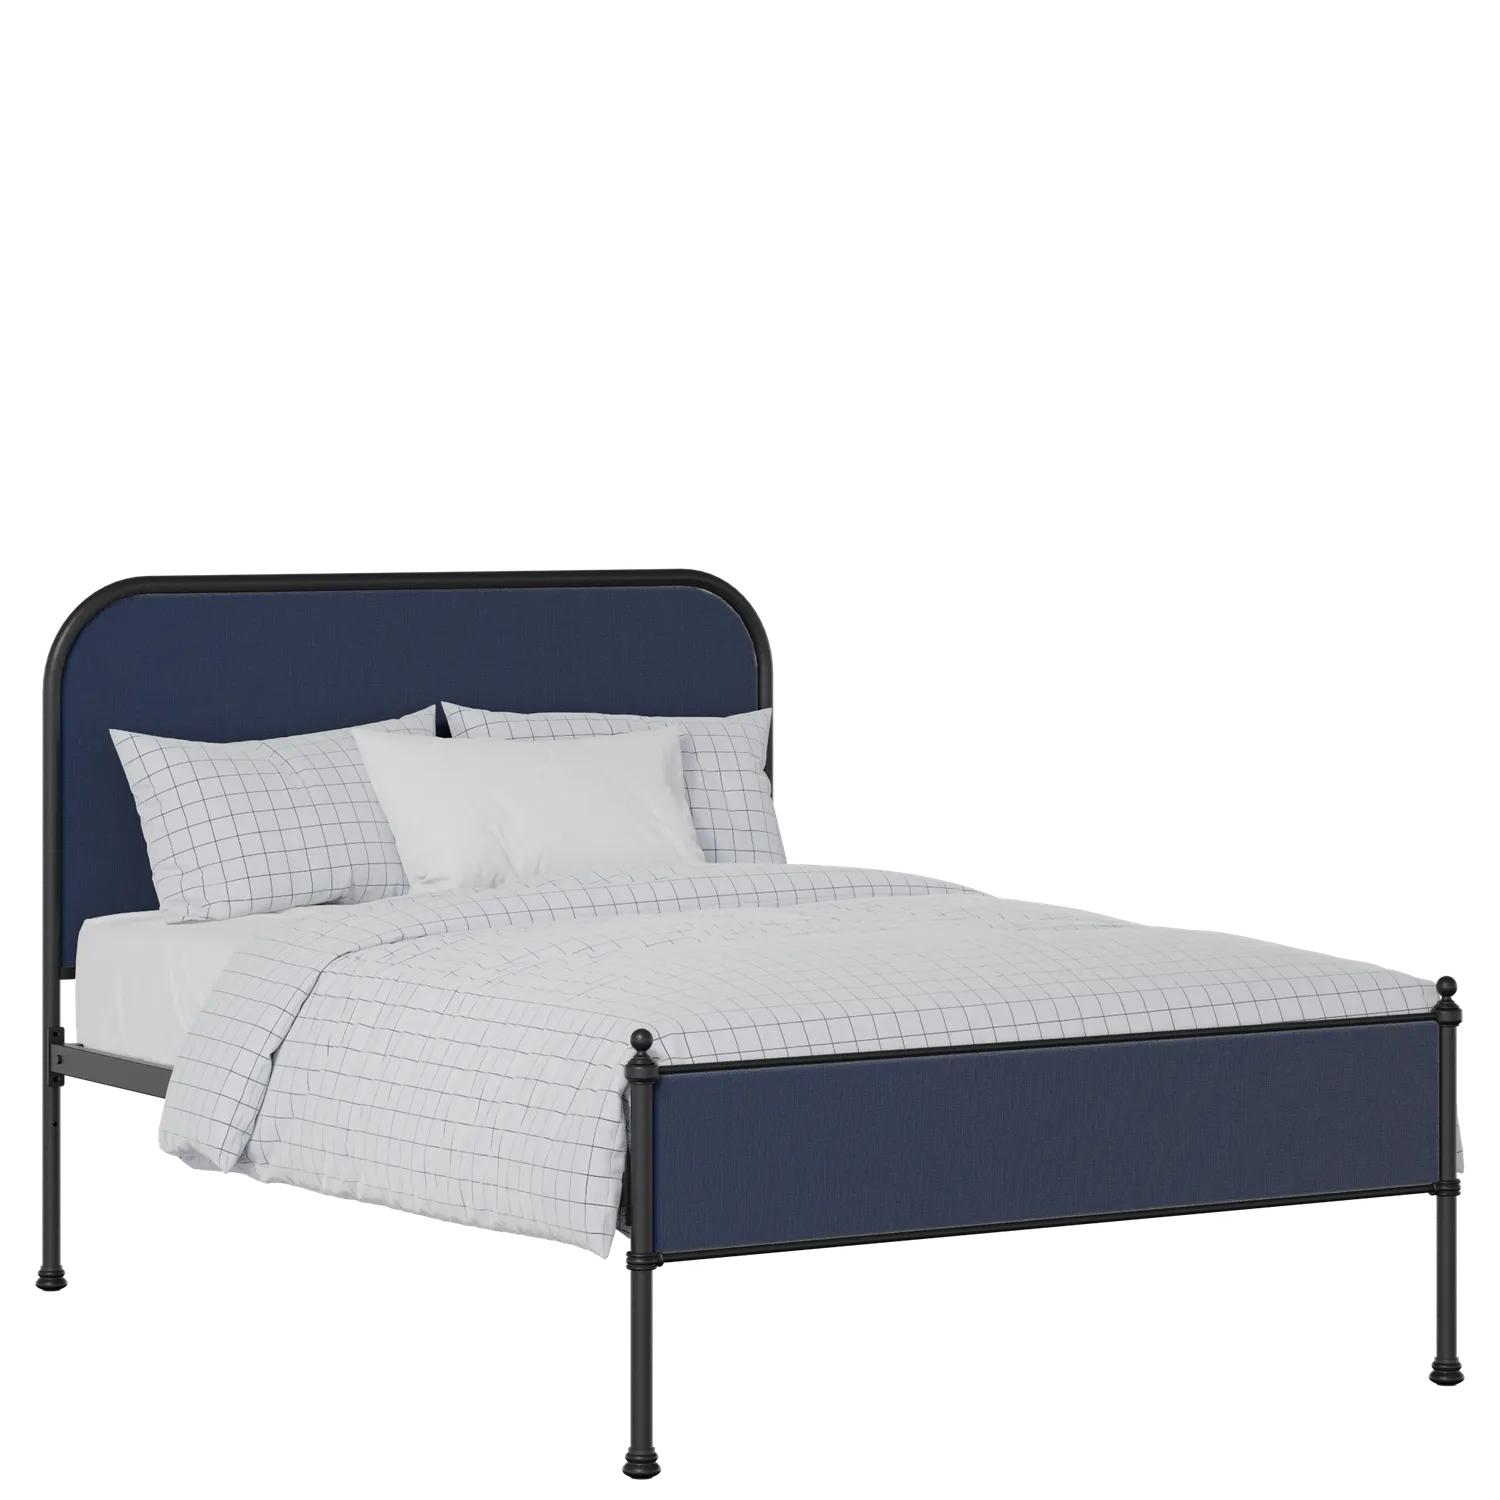 Bray Slim iron/metal upholstered bed in black with blue fabric